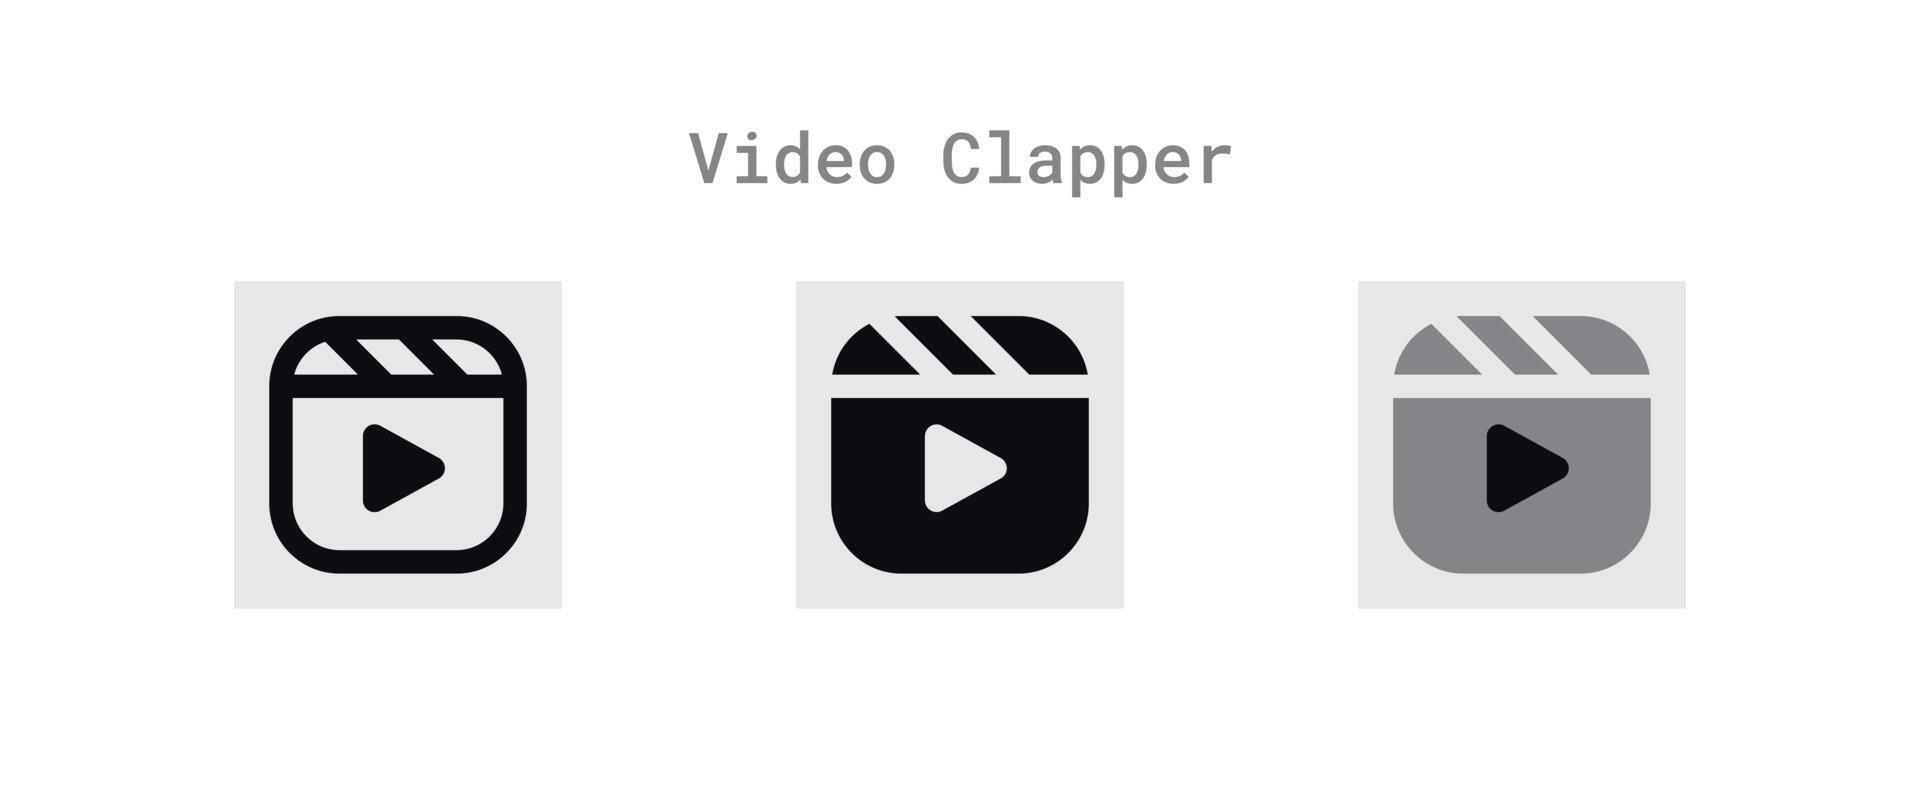 Video Clapper Icons Sheet vector